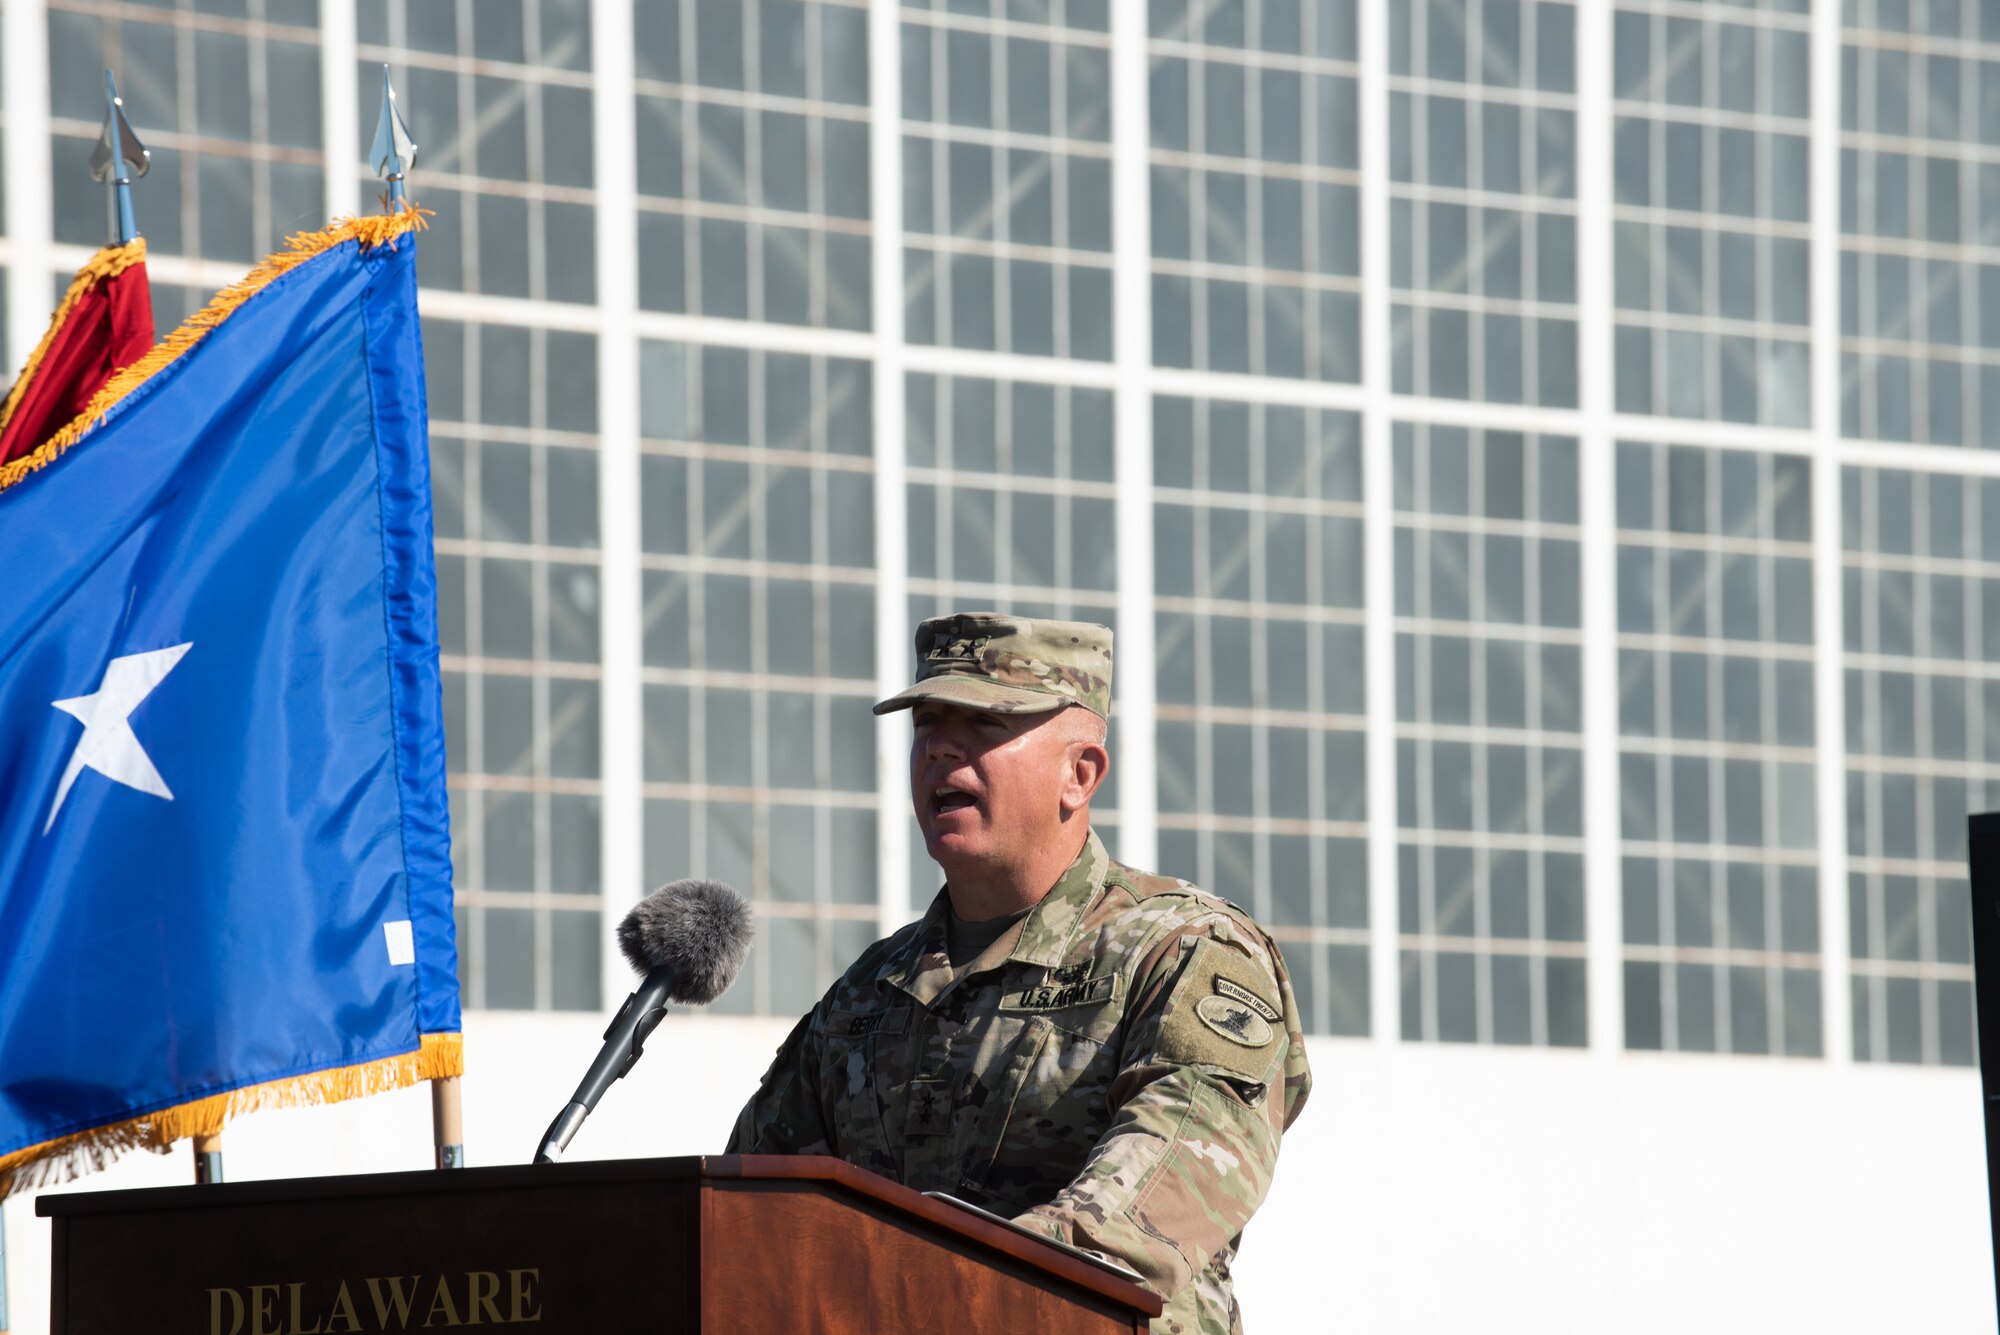 The Delaware National Guard celebrates the life and legacy of Maj Gen Carol Timmons